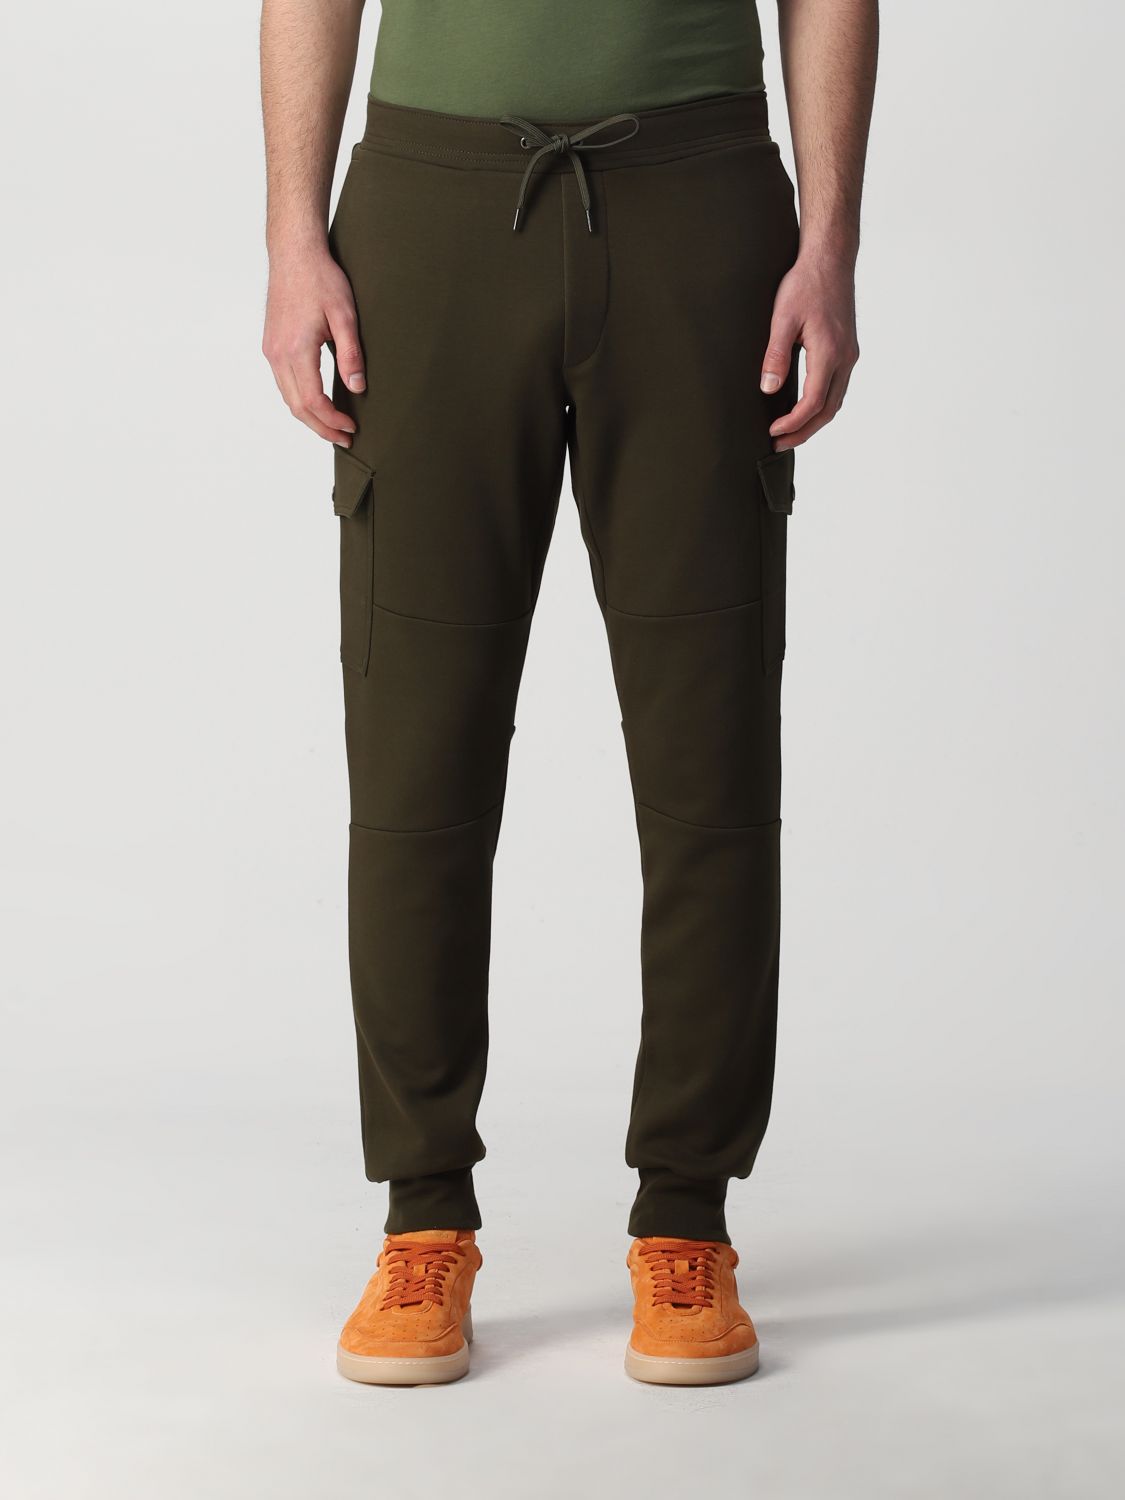 Polo Ralph Lauren Outlet: pants for man - Green | Polo Ralph Lauren pants  710860590 online on 